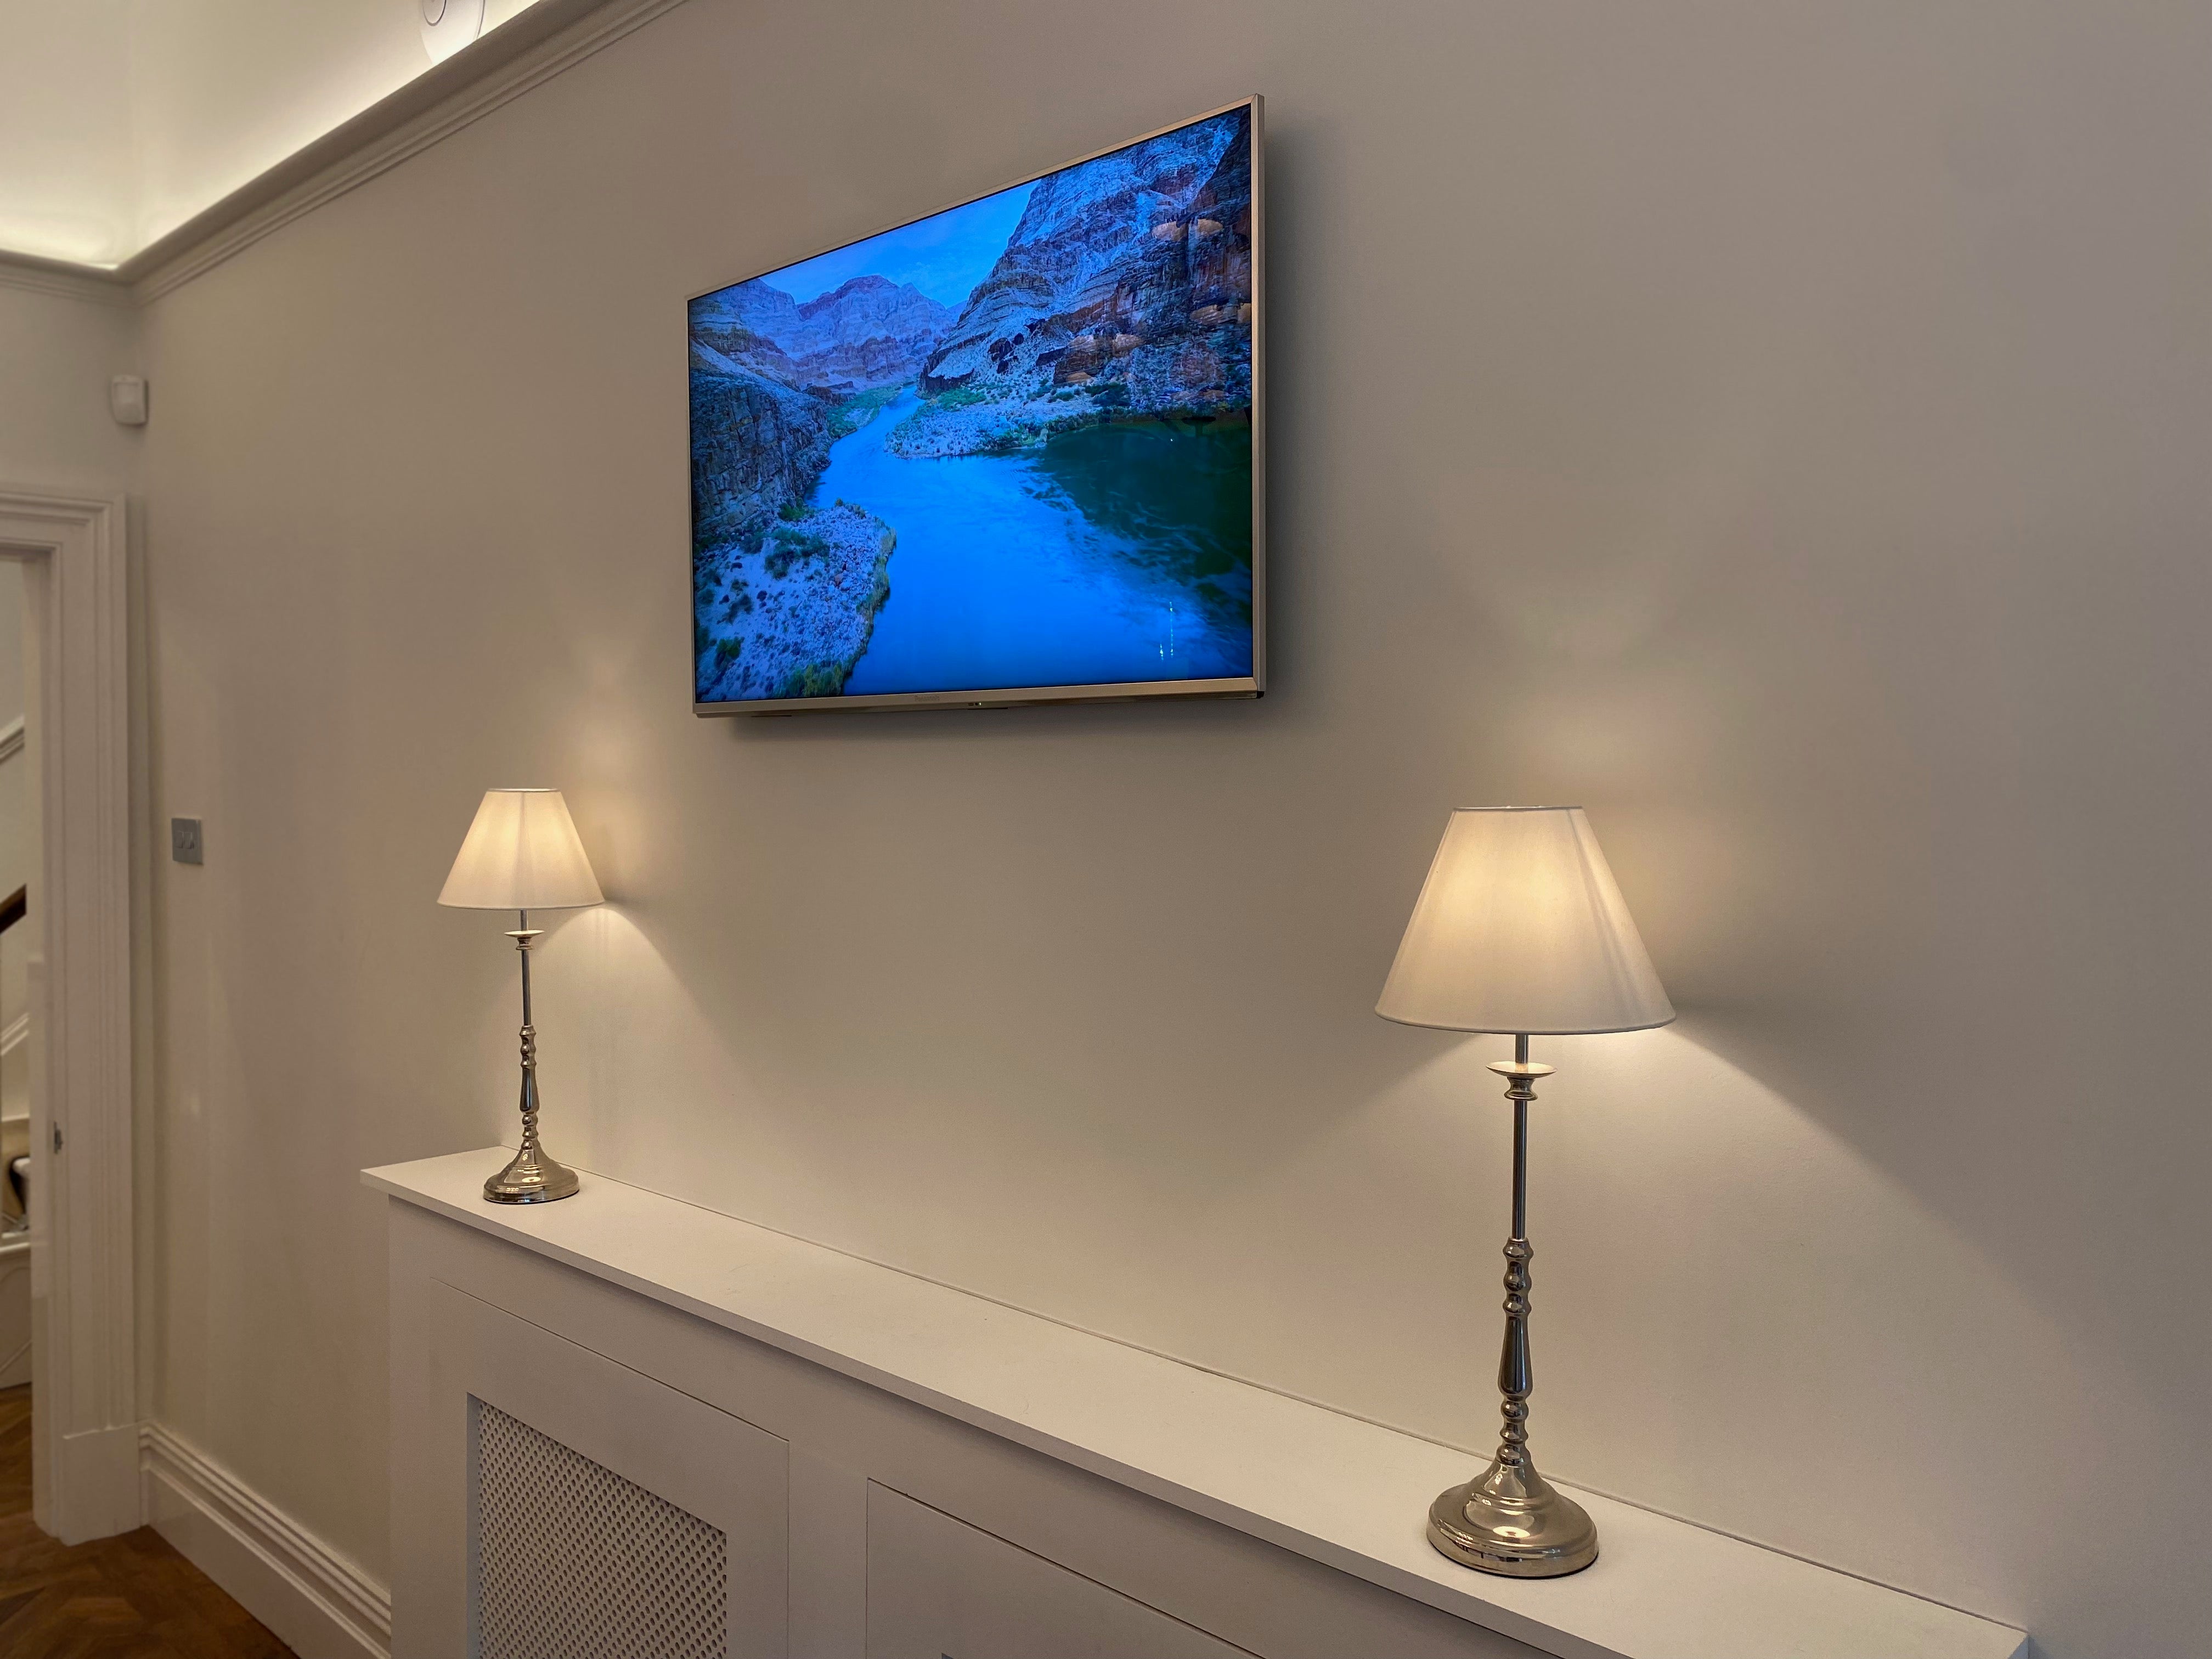 A wall mounted TV displays an image of a river, with two metal lamps underneath. 